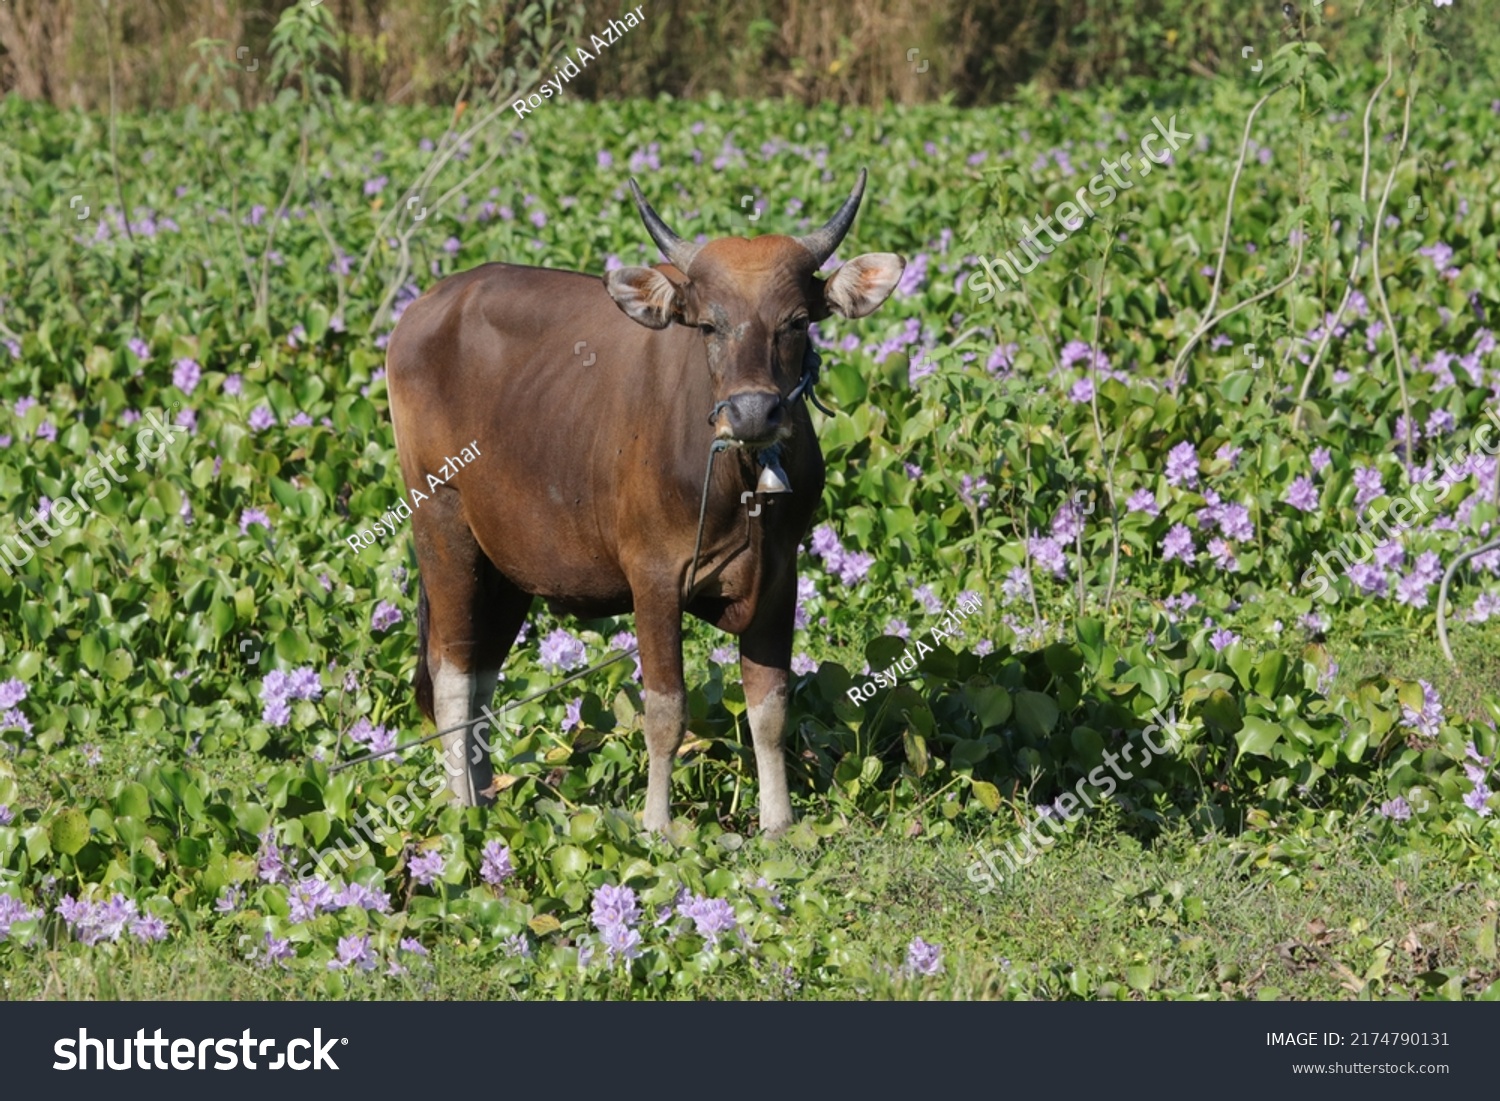 Banteng or bali cow also known as tembadau, is a species of wild cattle found in Southeast Asia.  Cow are on the field. This small cow is brown in color and strong adapt to tropical temperatures. #2174790131